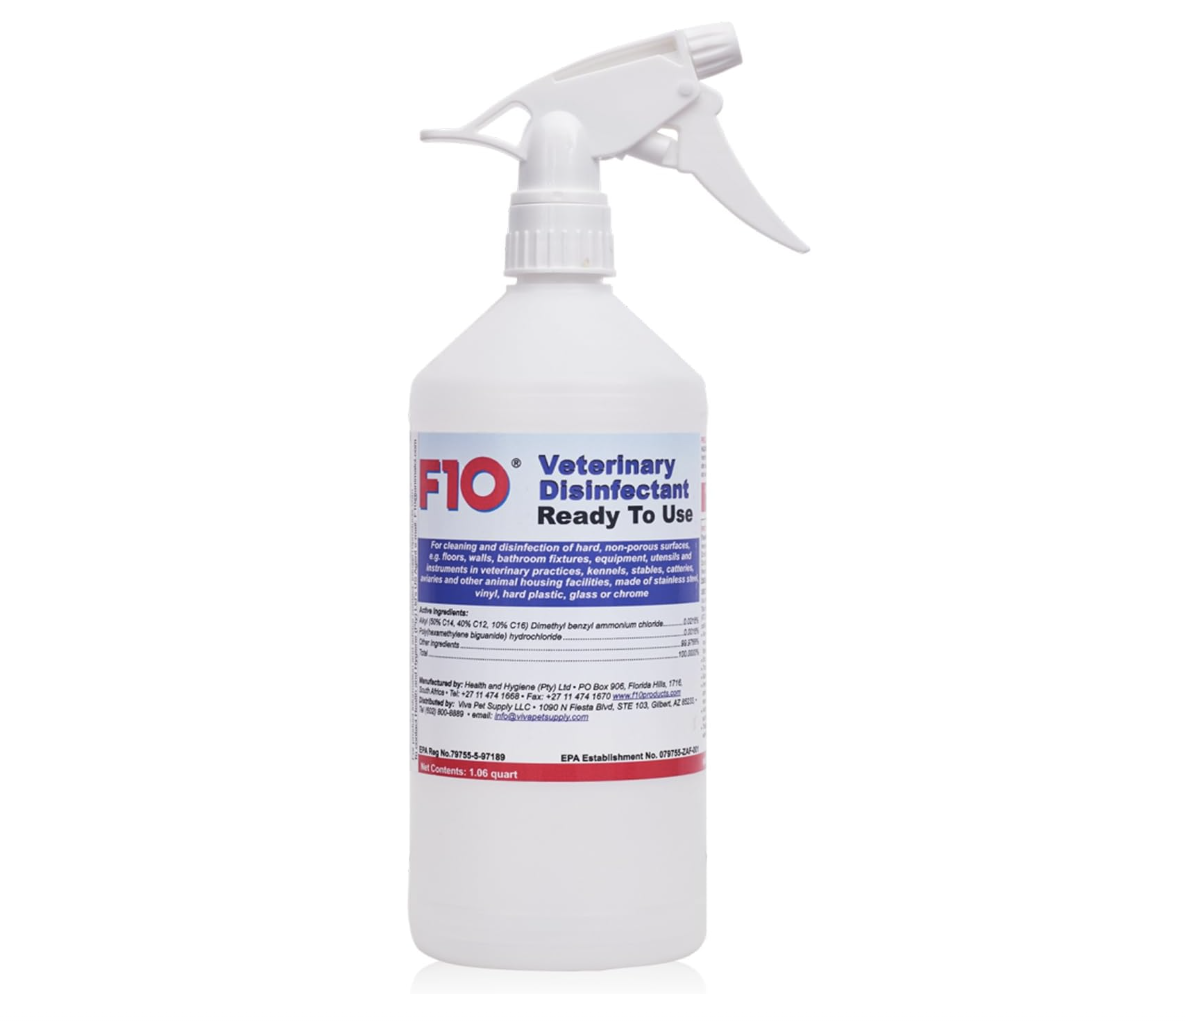 Bottle of F10 Veterinary Disinfectant on a plain background